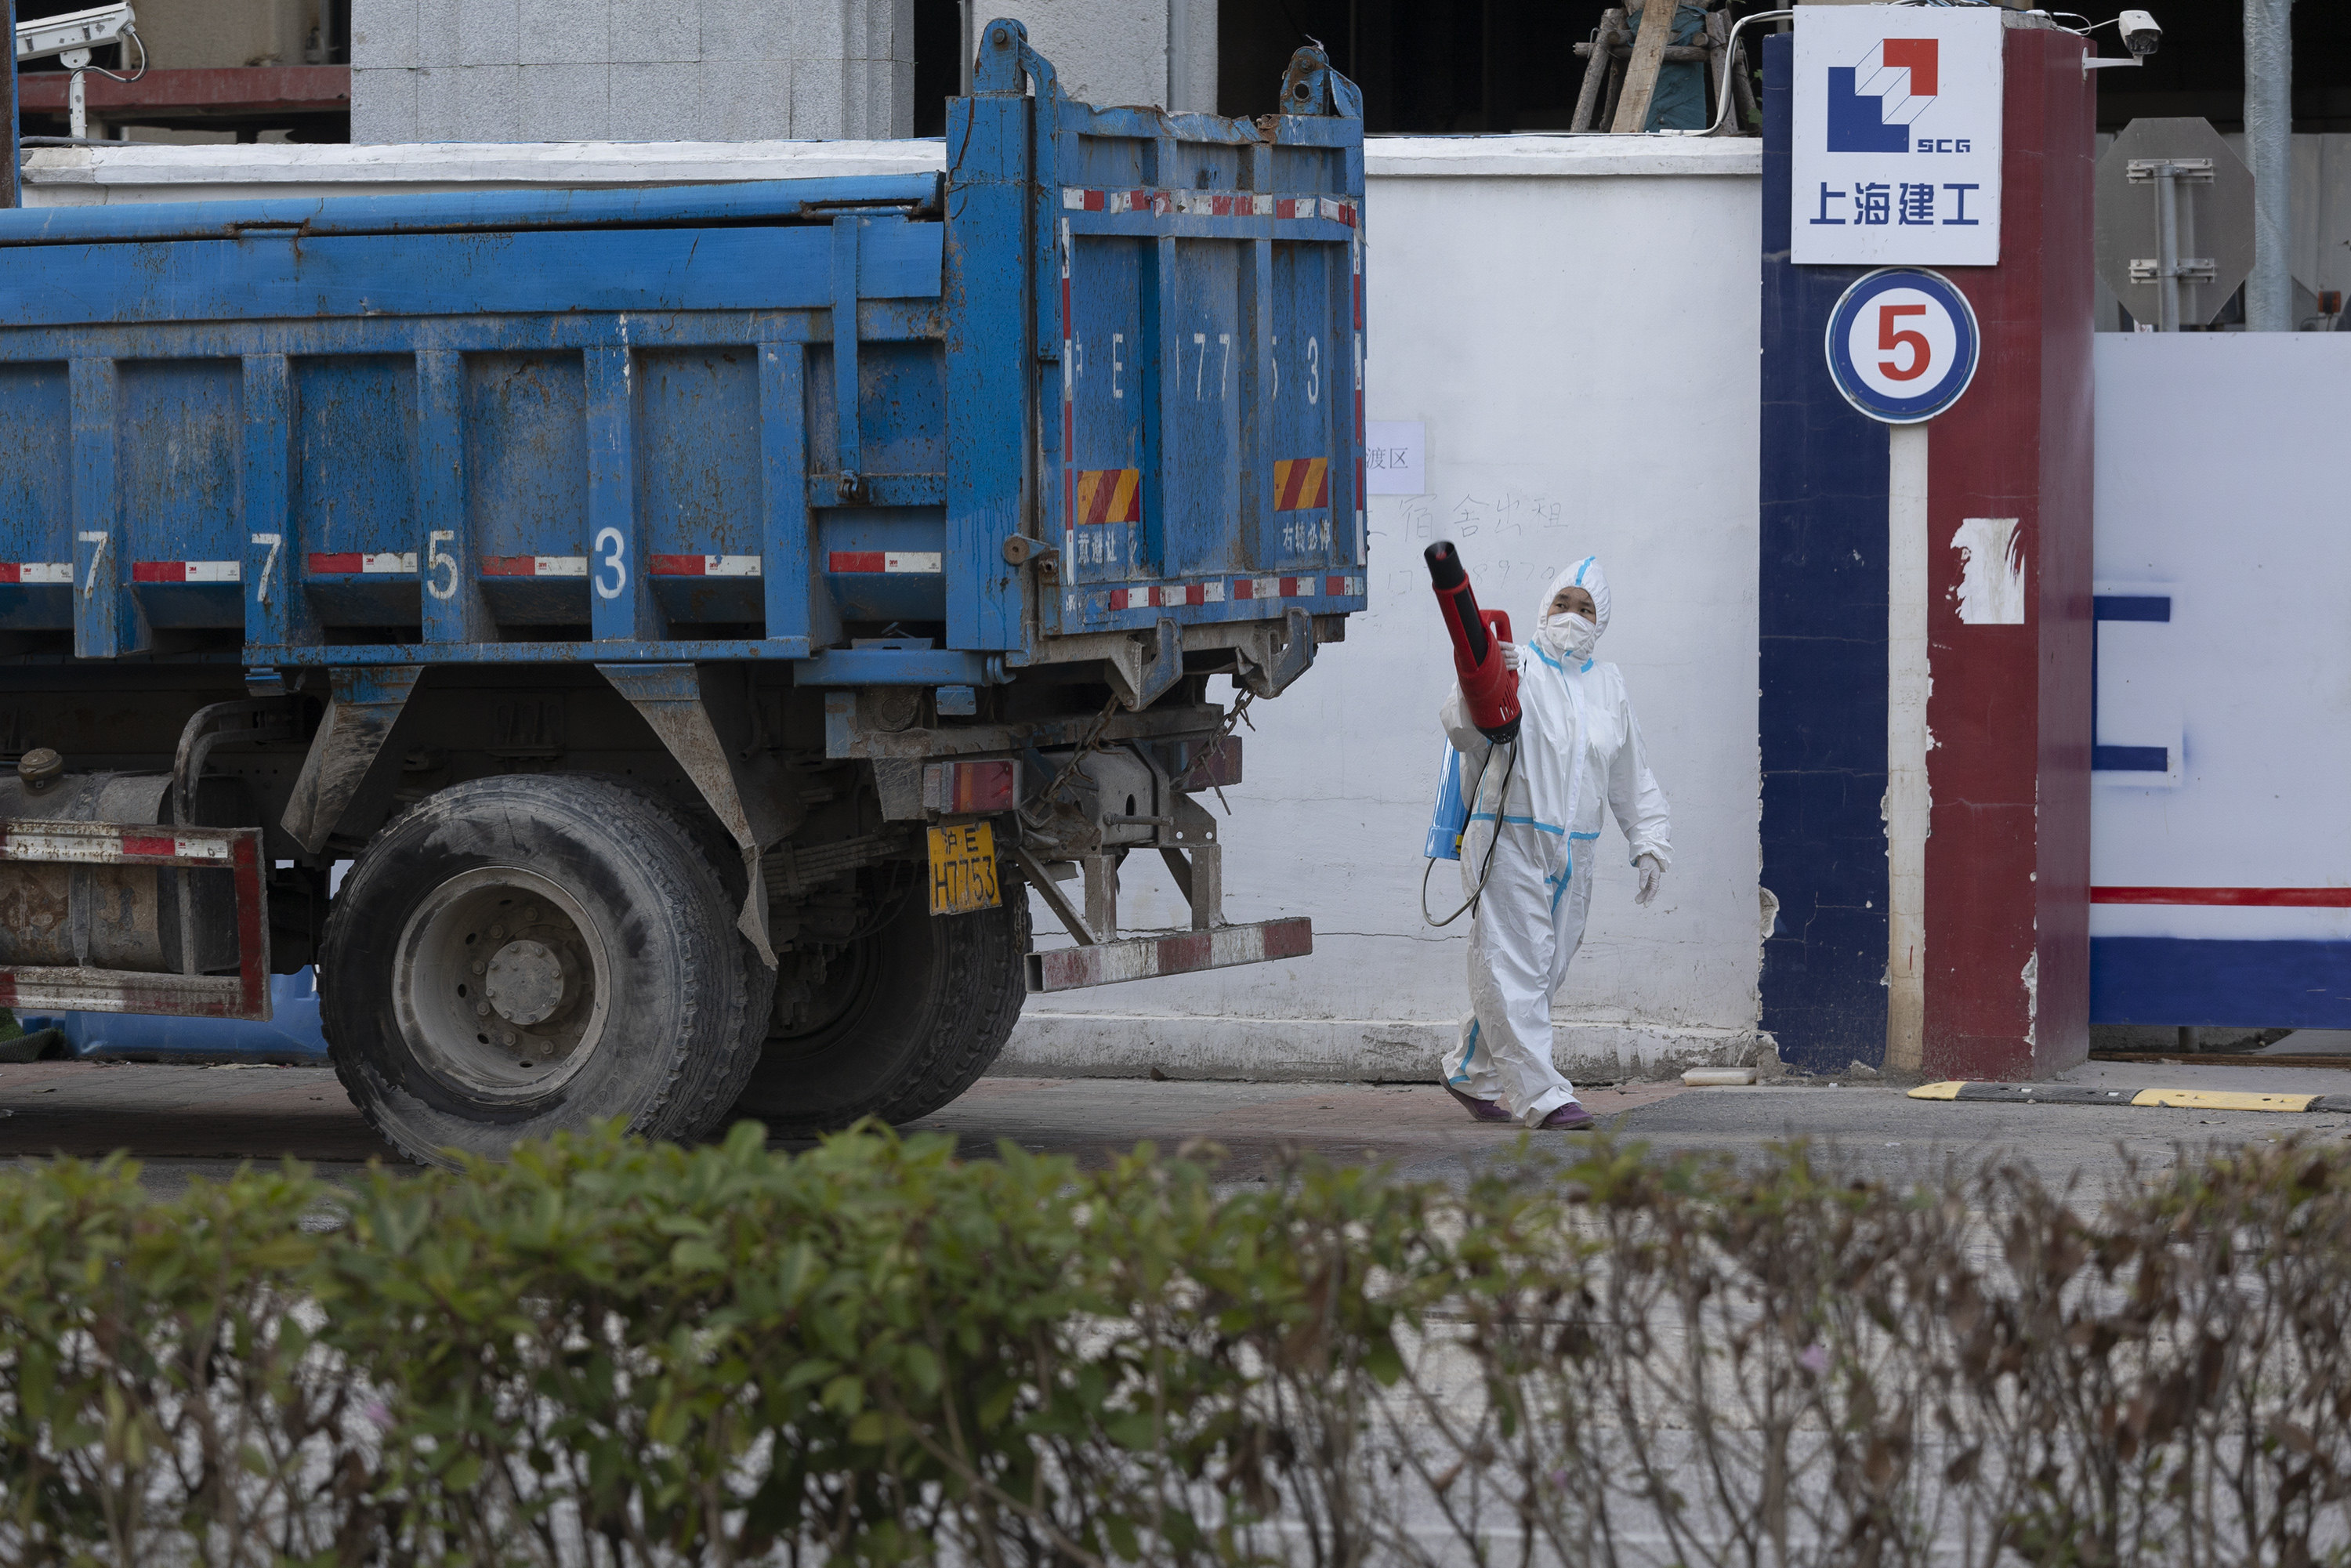 A truck is disinfected at a construction site in Shanghai on Tuesday. Road freight has been seriously impeded by China’s zero-Covid restrictions. Photo: Getty Images